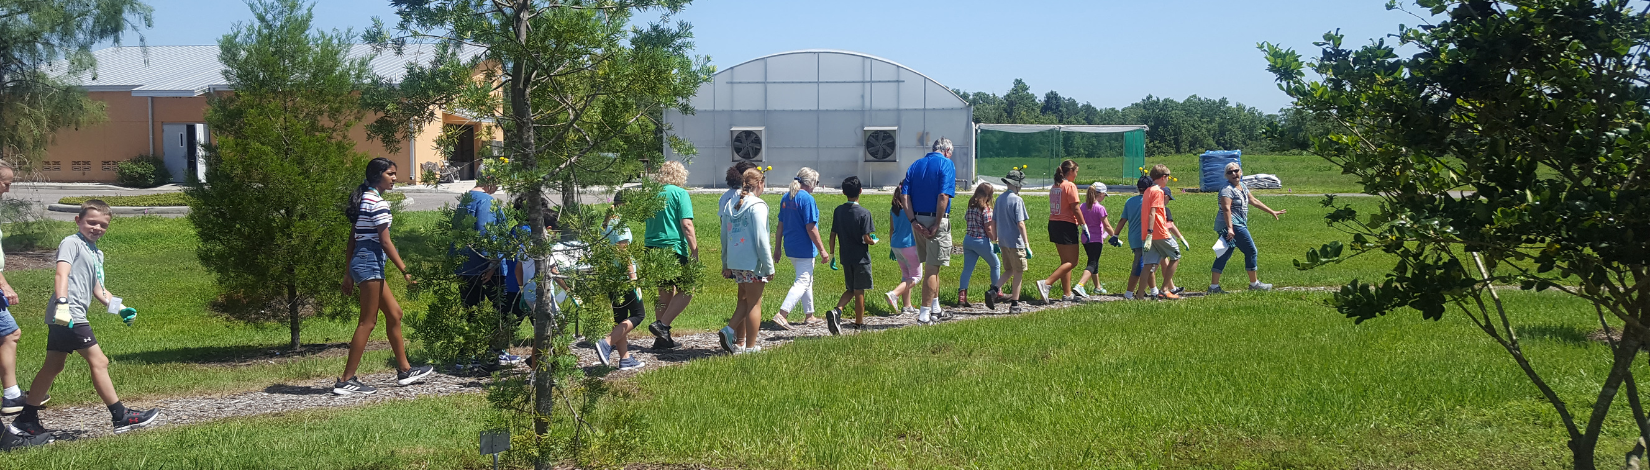 Group of Orange County 4-H kids walking in the garden during HK Camp 2019. 